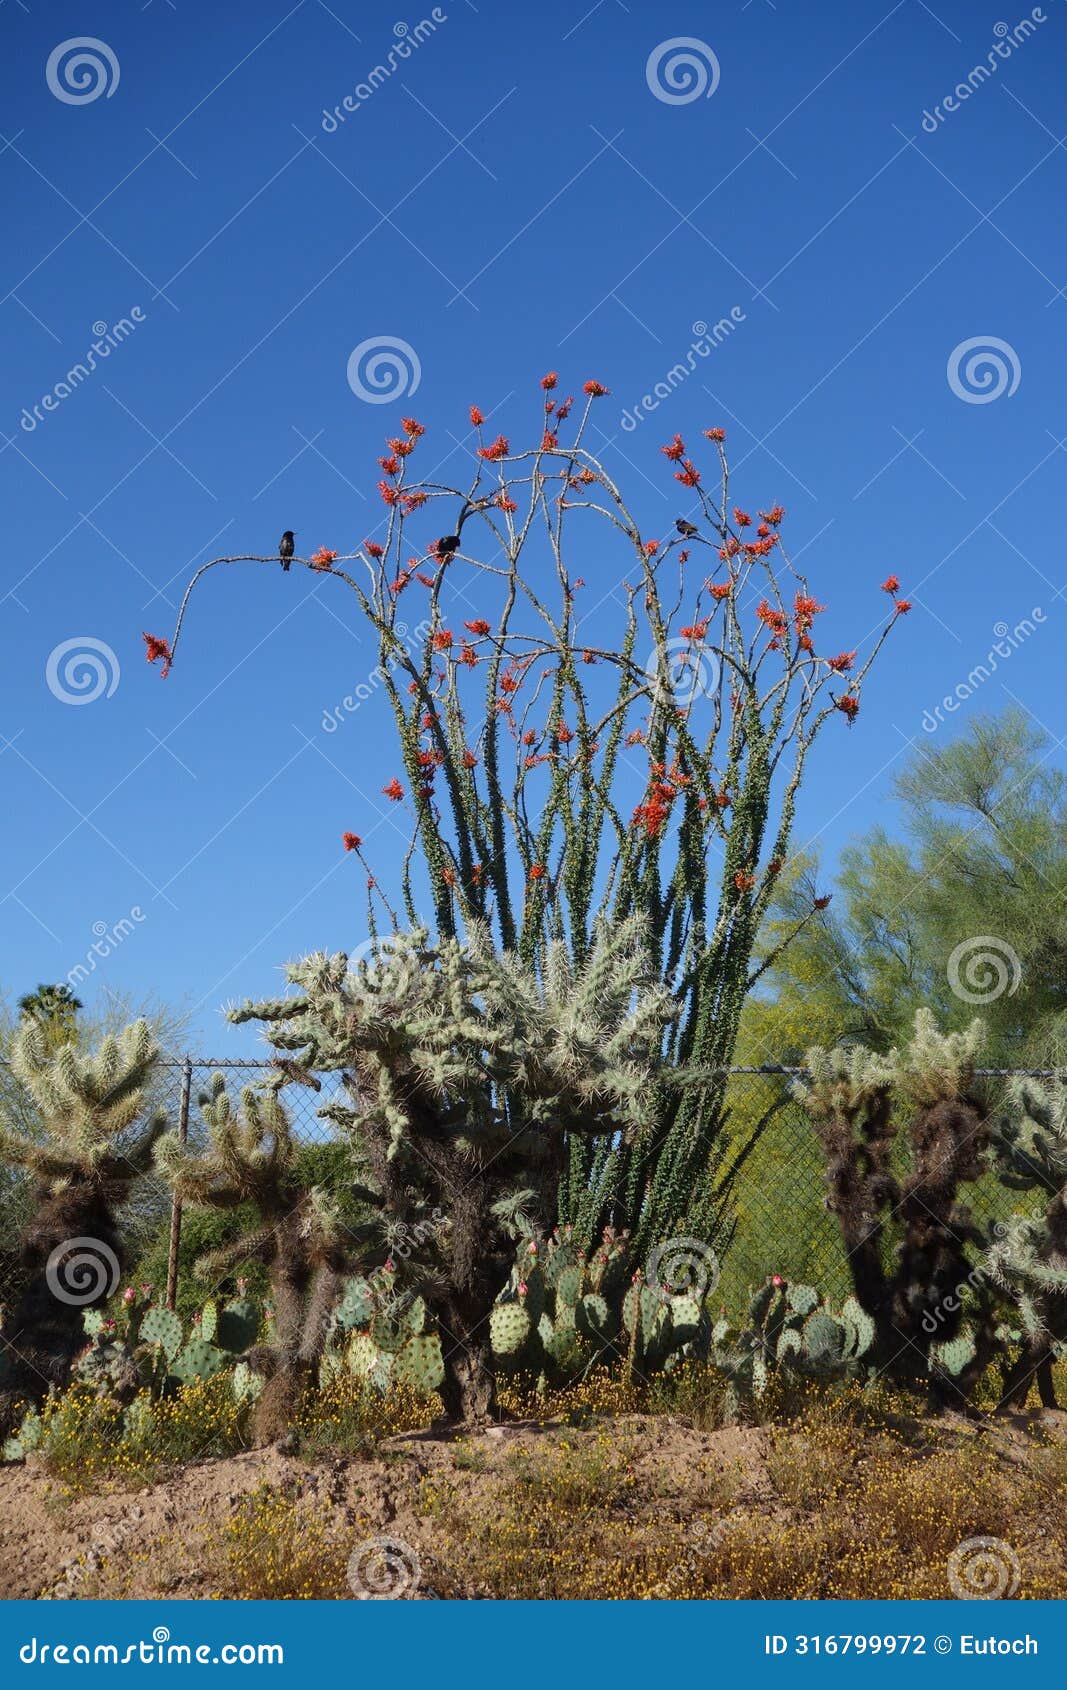 desert patch with ocotillo, jumping cholla and nopal cacti